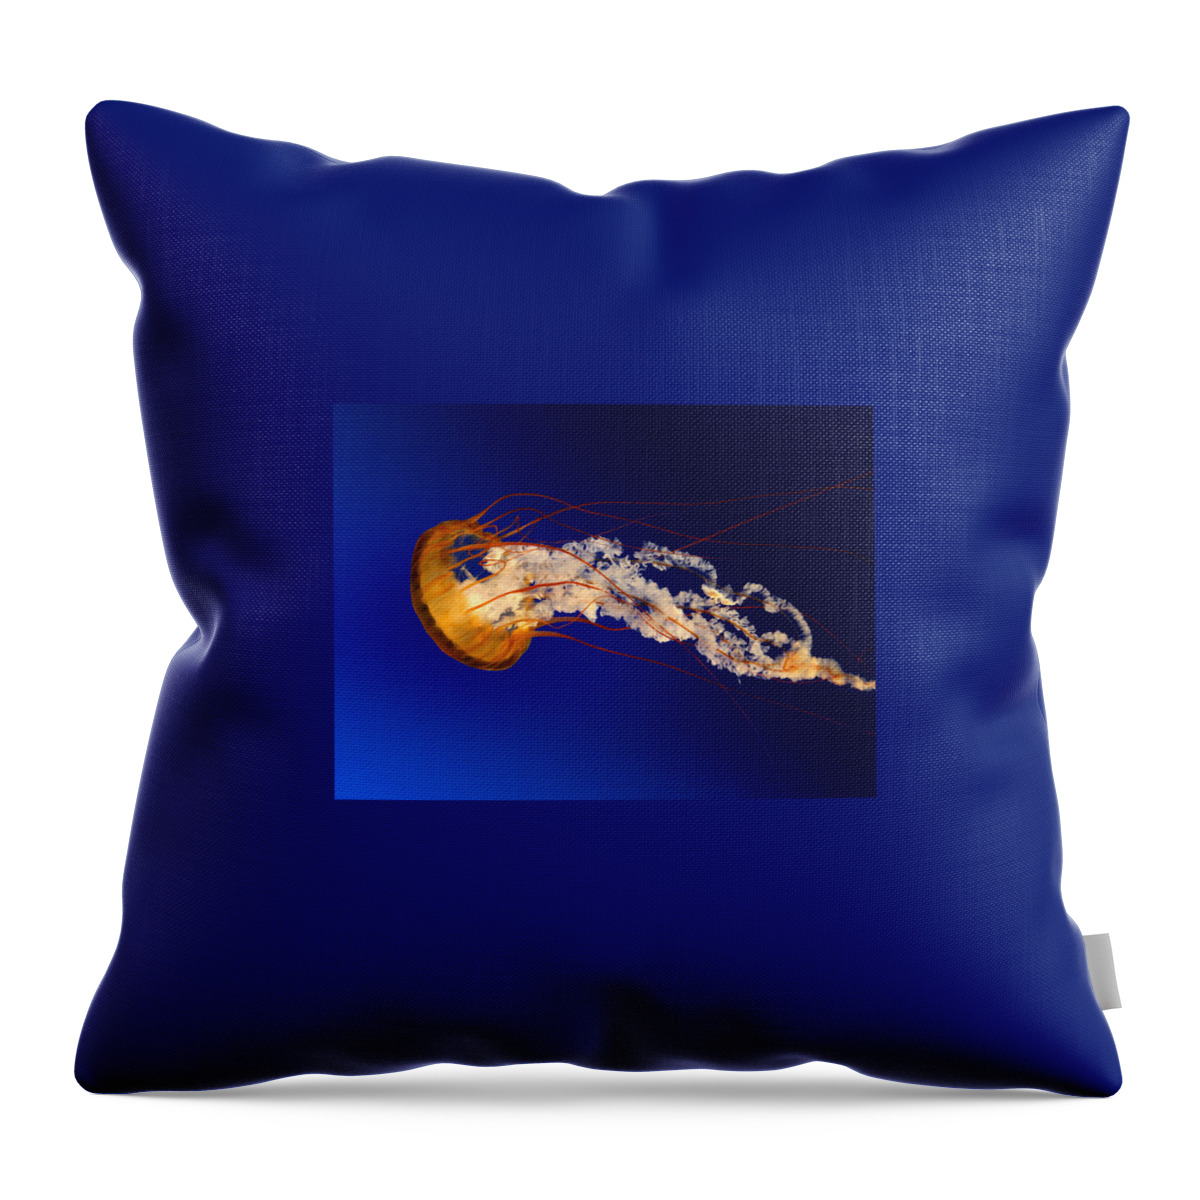 Photograph Throw Pillow featuring the photograph HJK by Raj Singh